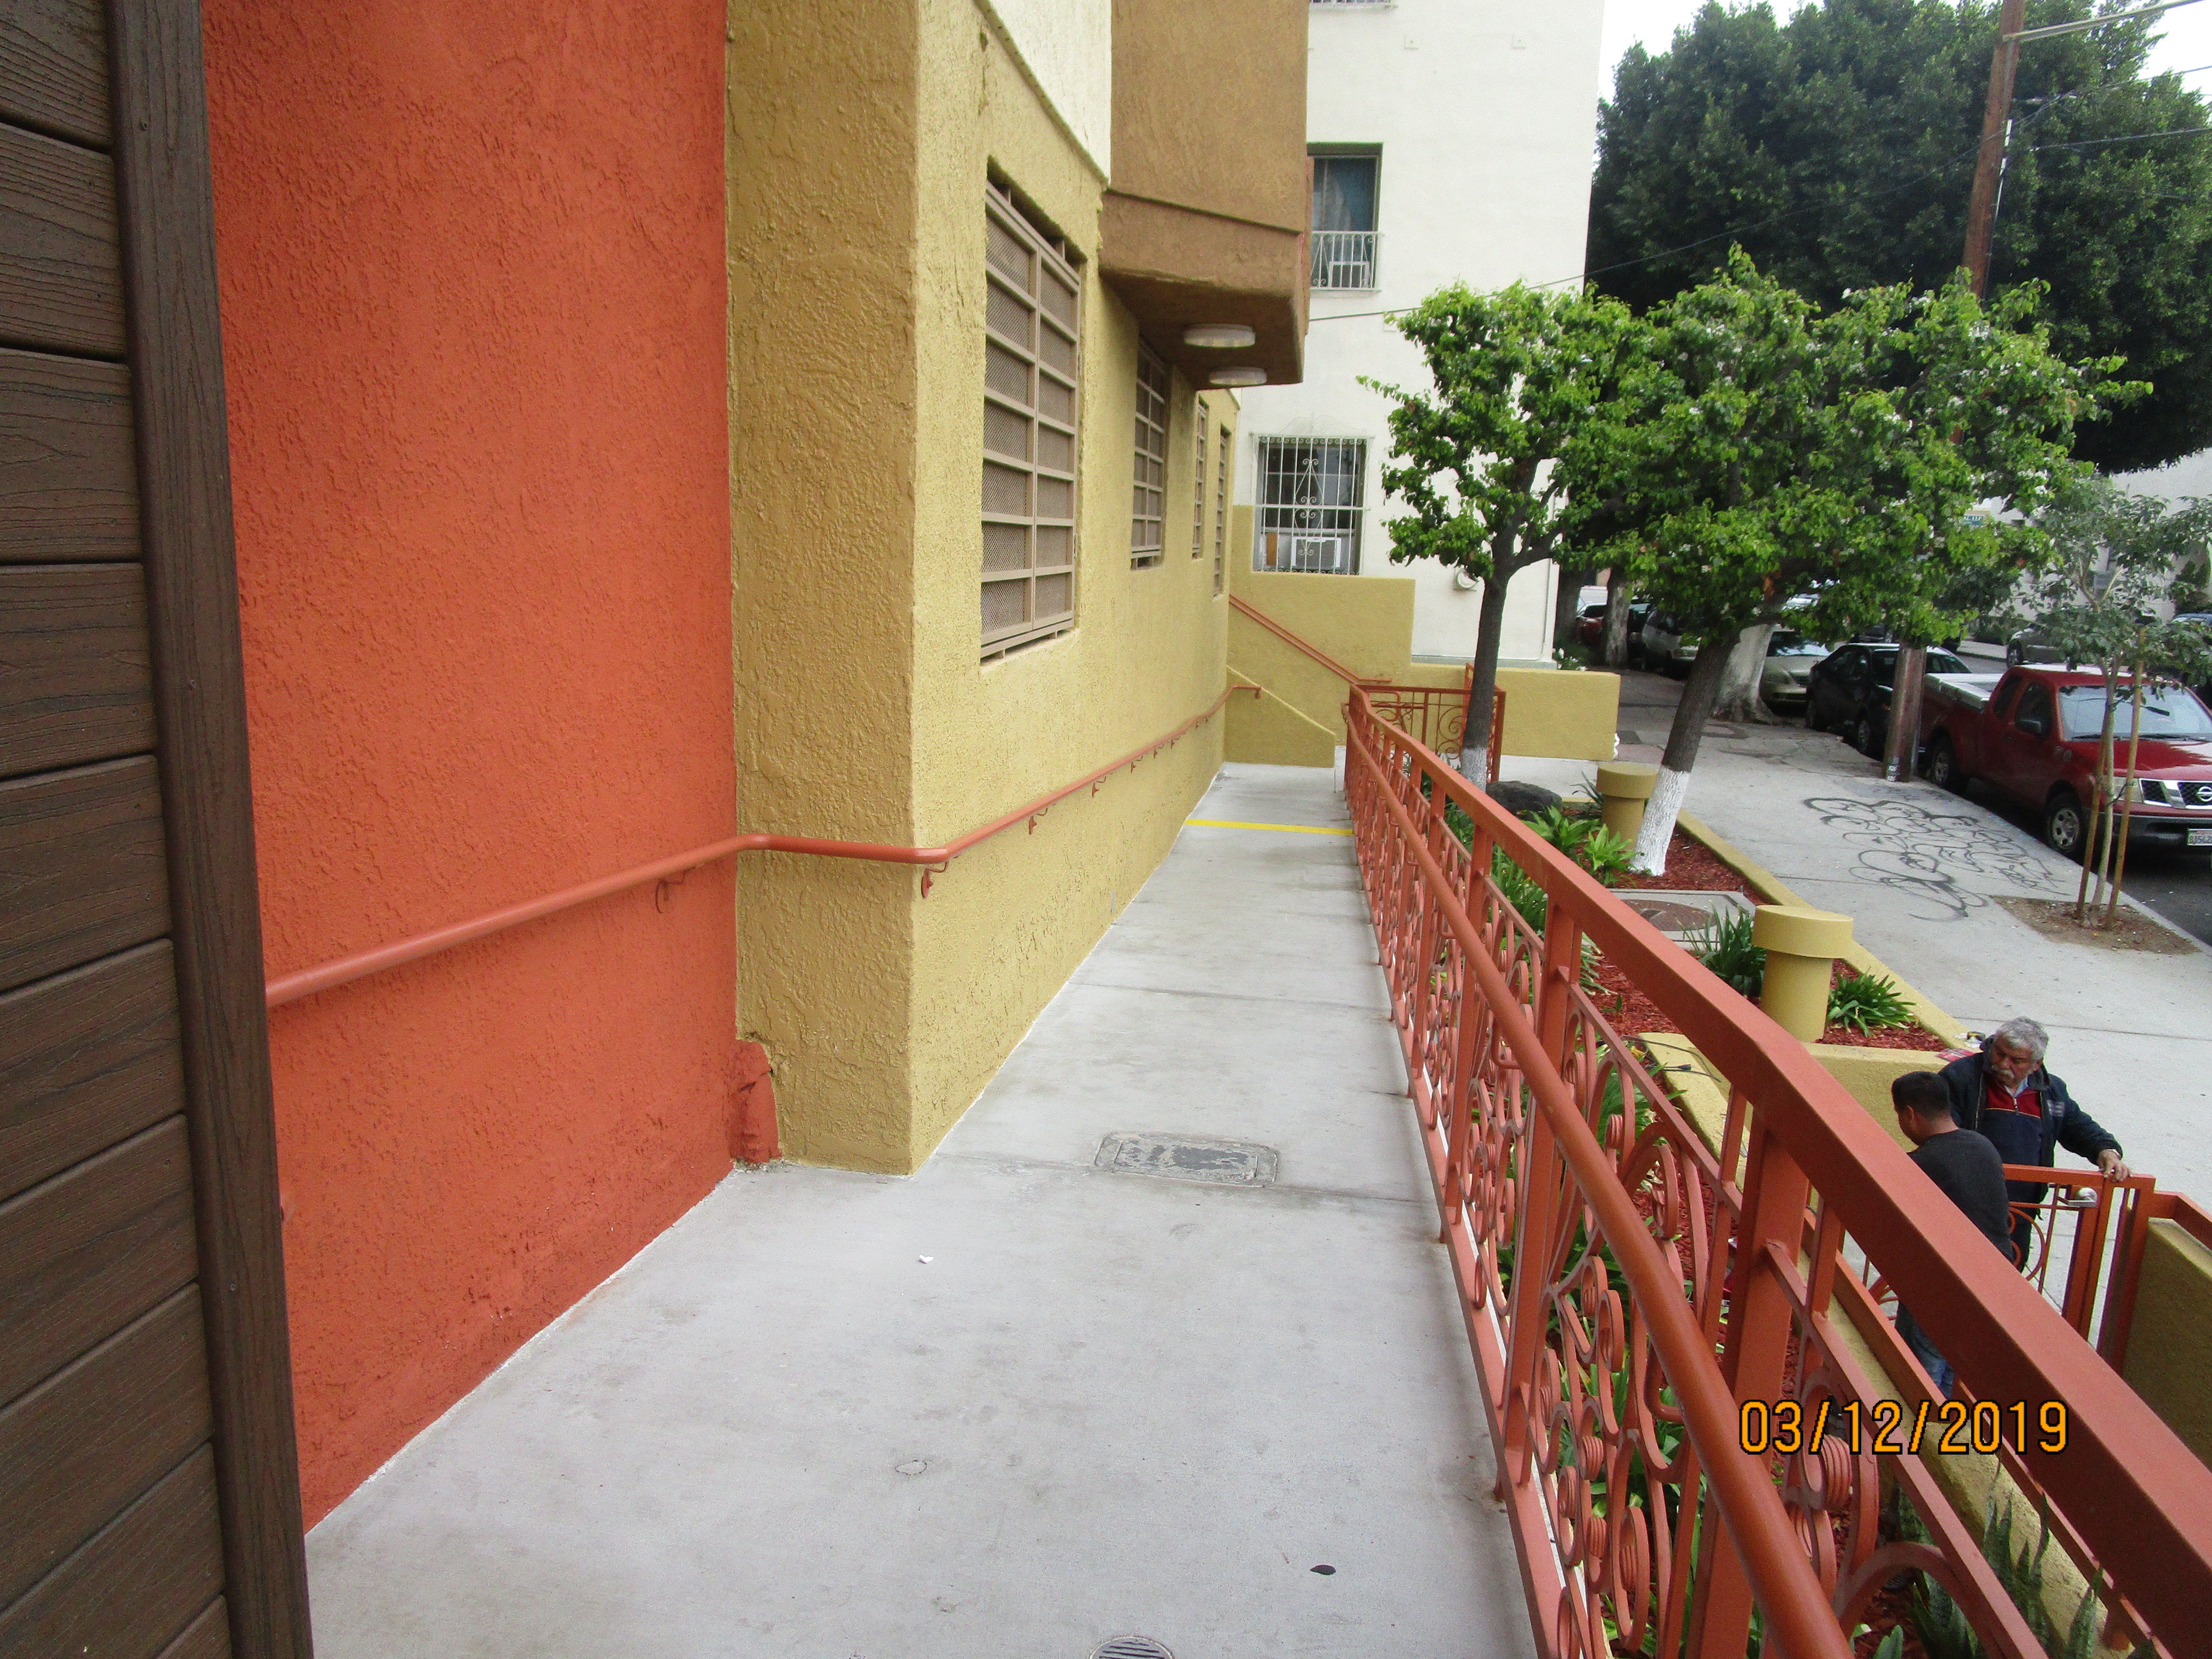 Front view of a concrete ramp, orange metal handrails on both sides.